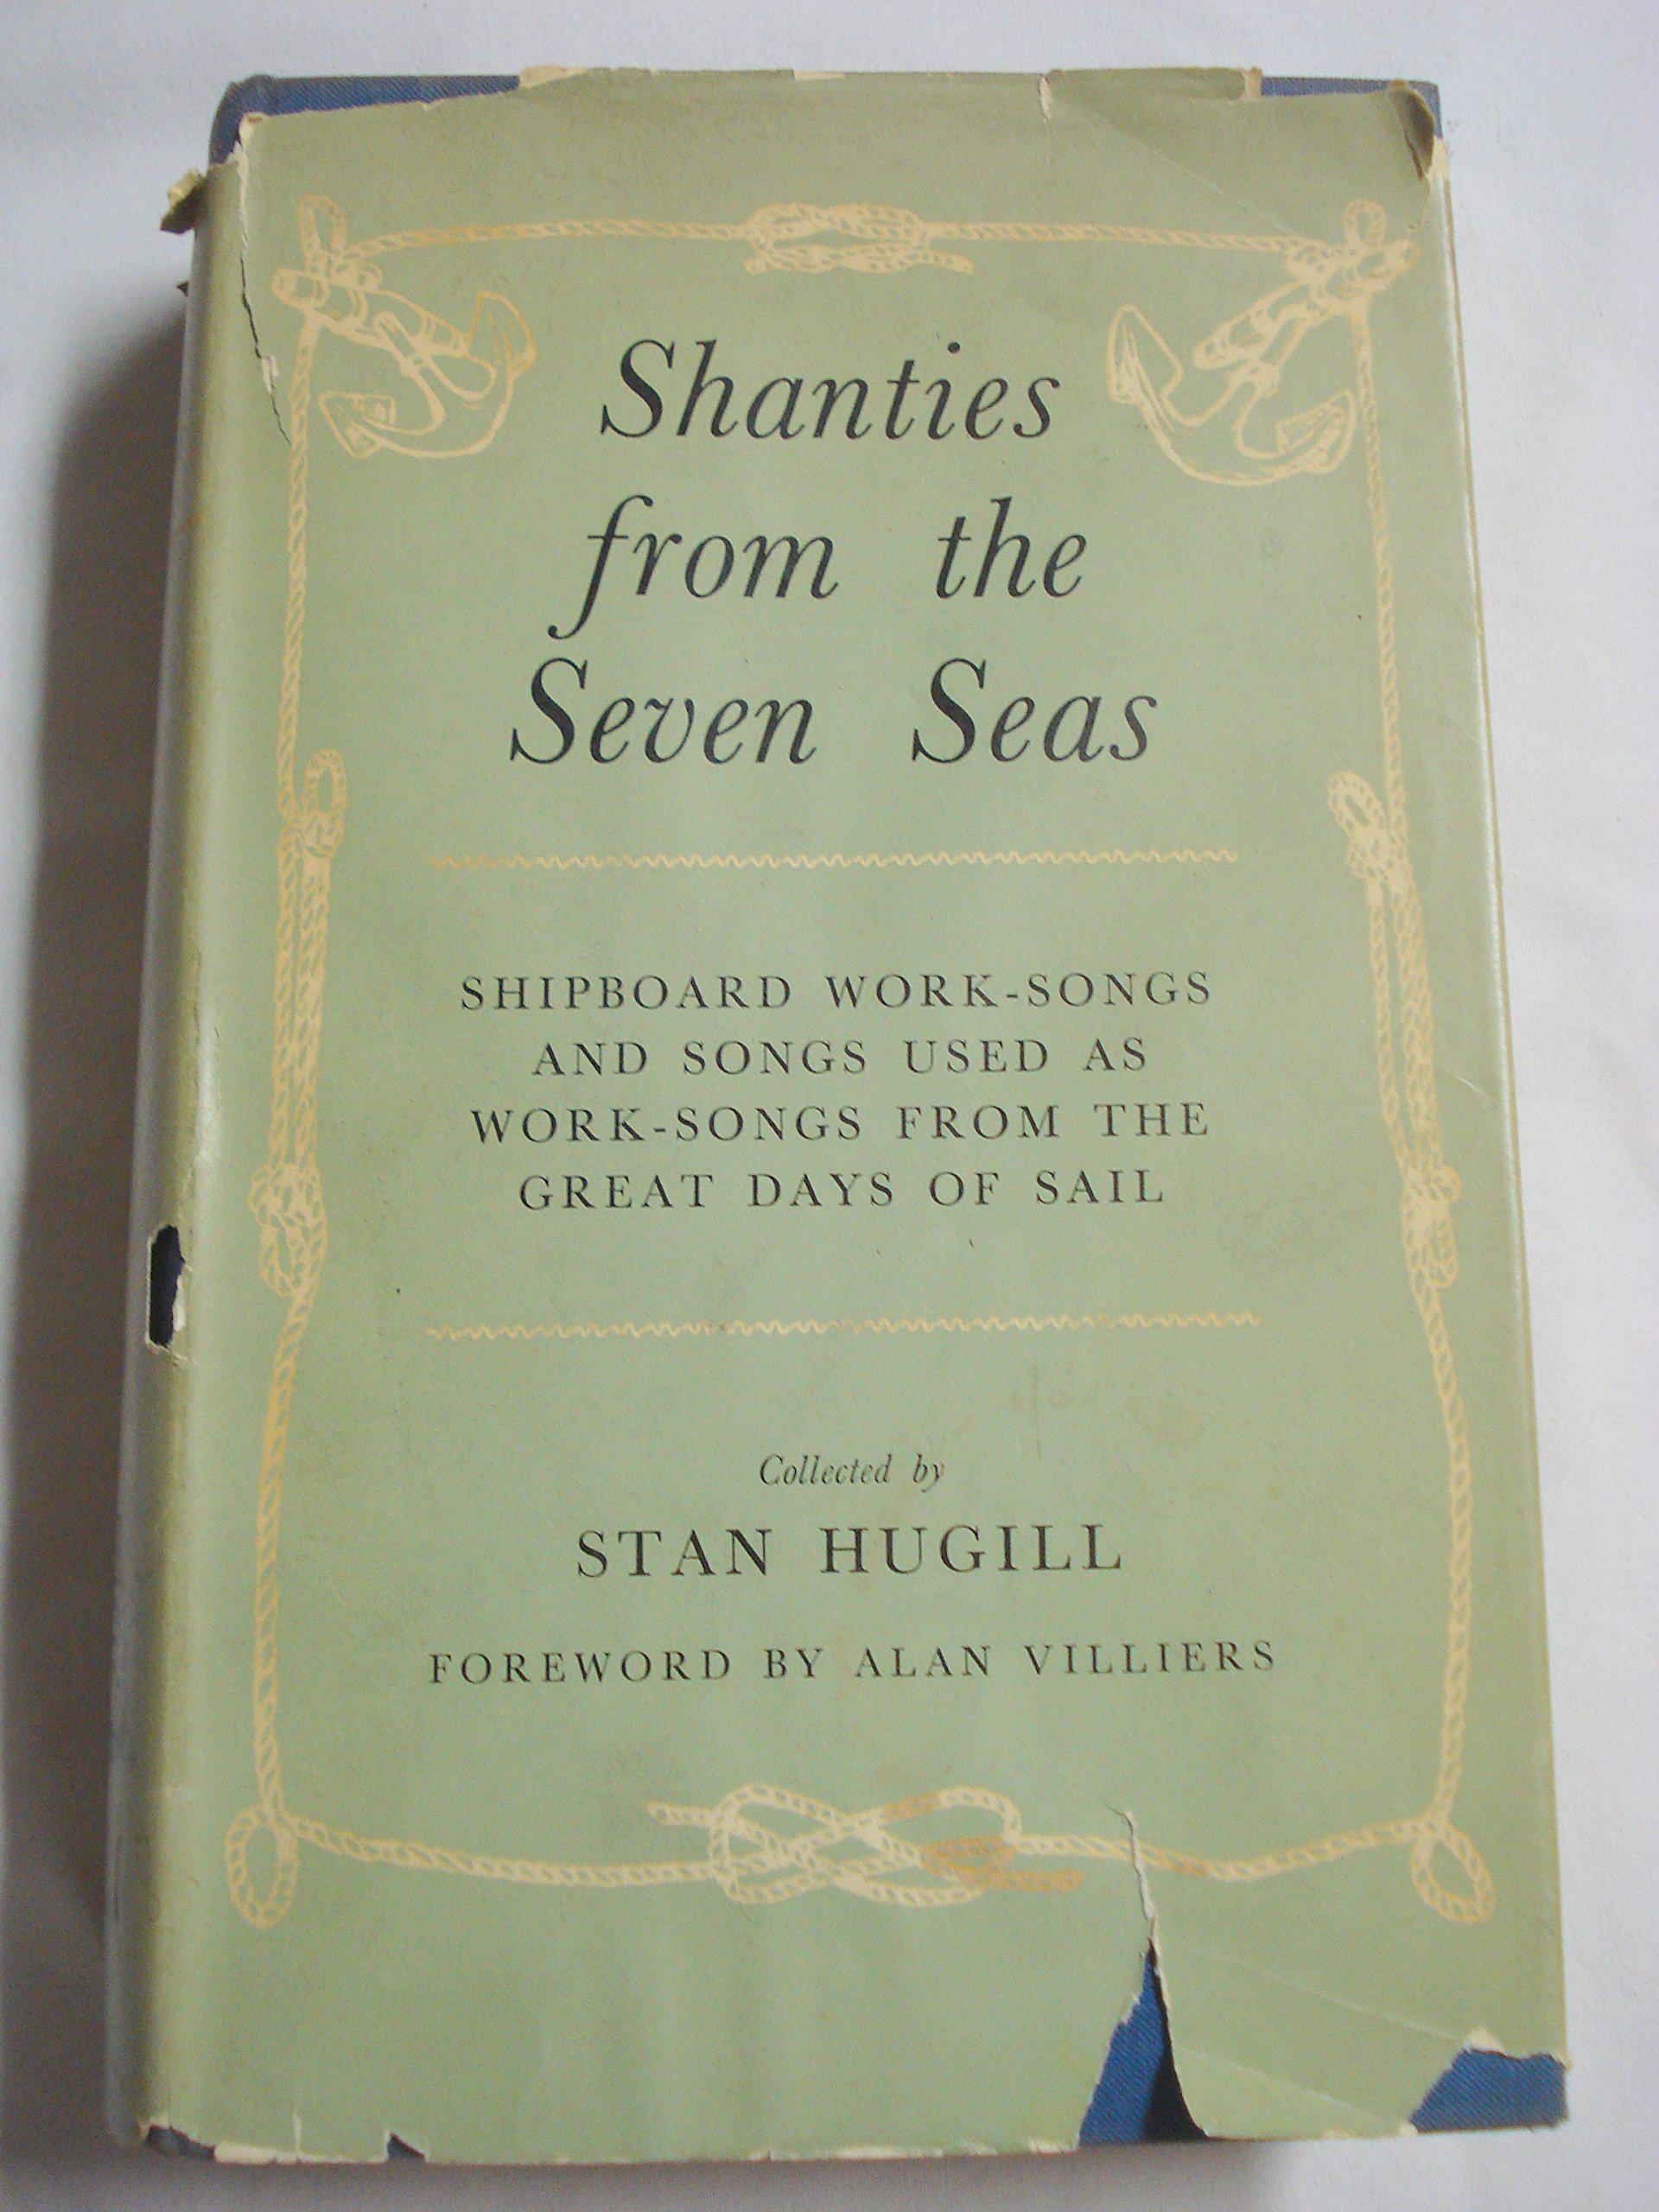 Shanties From the Seven Seas